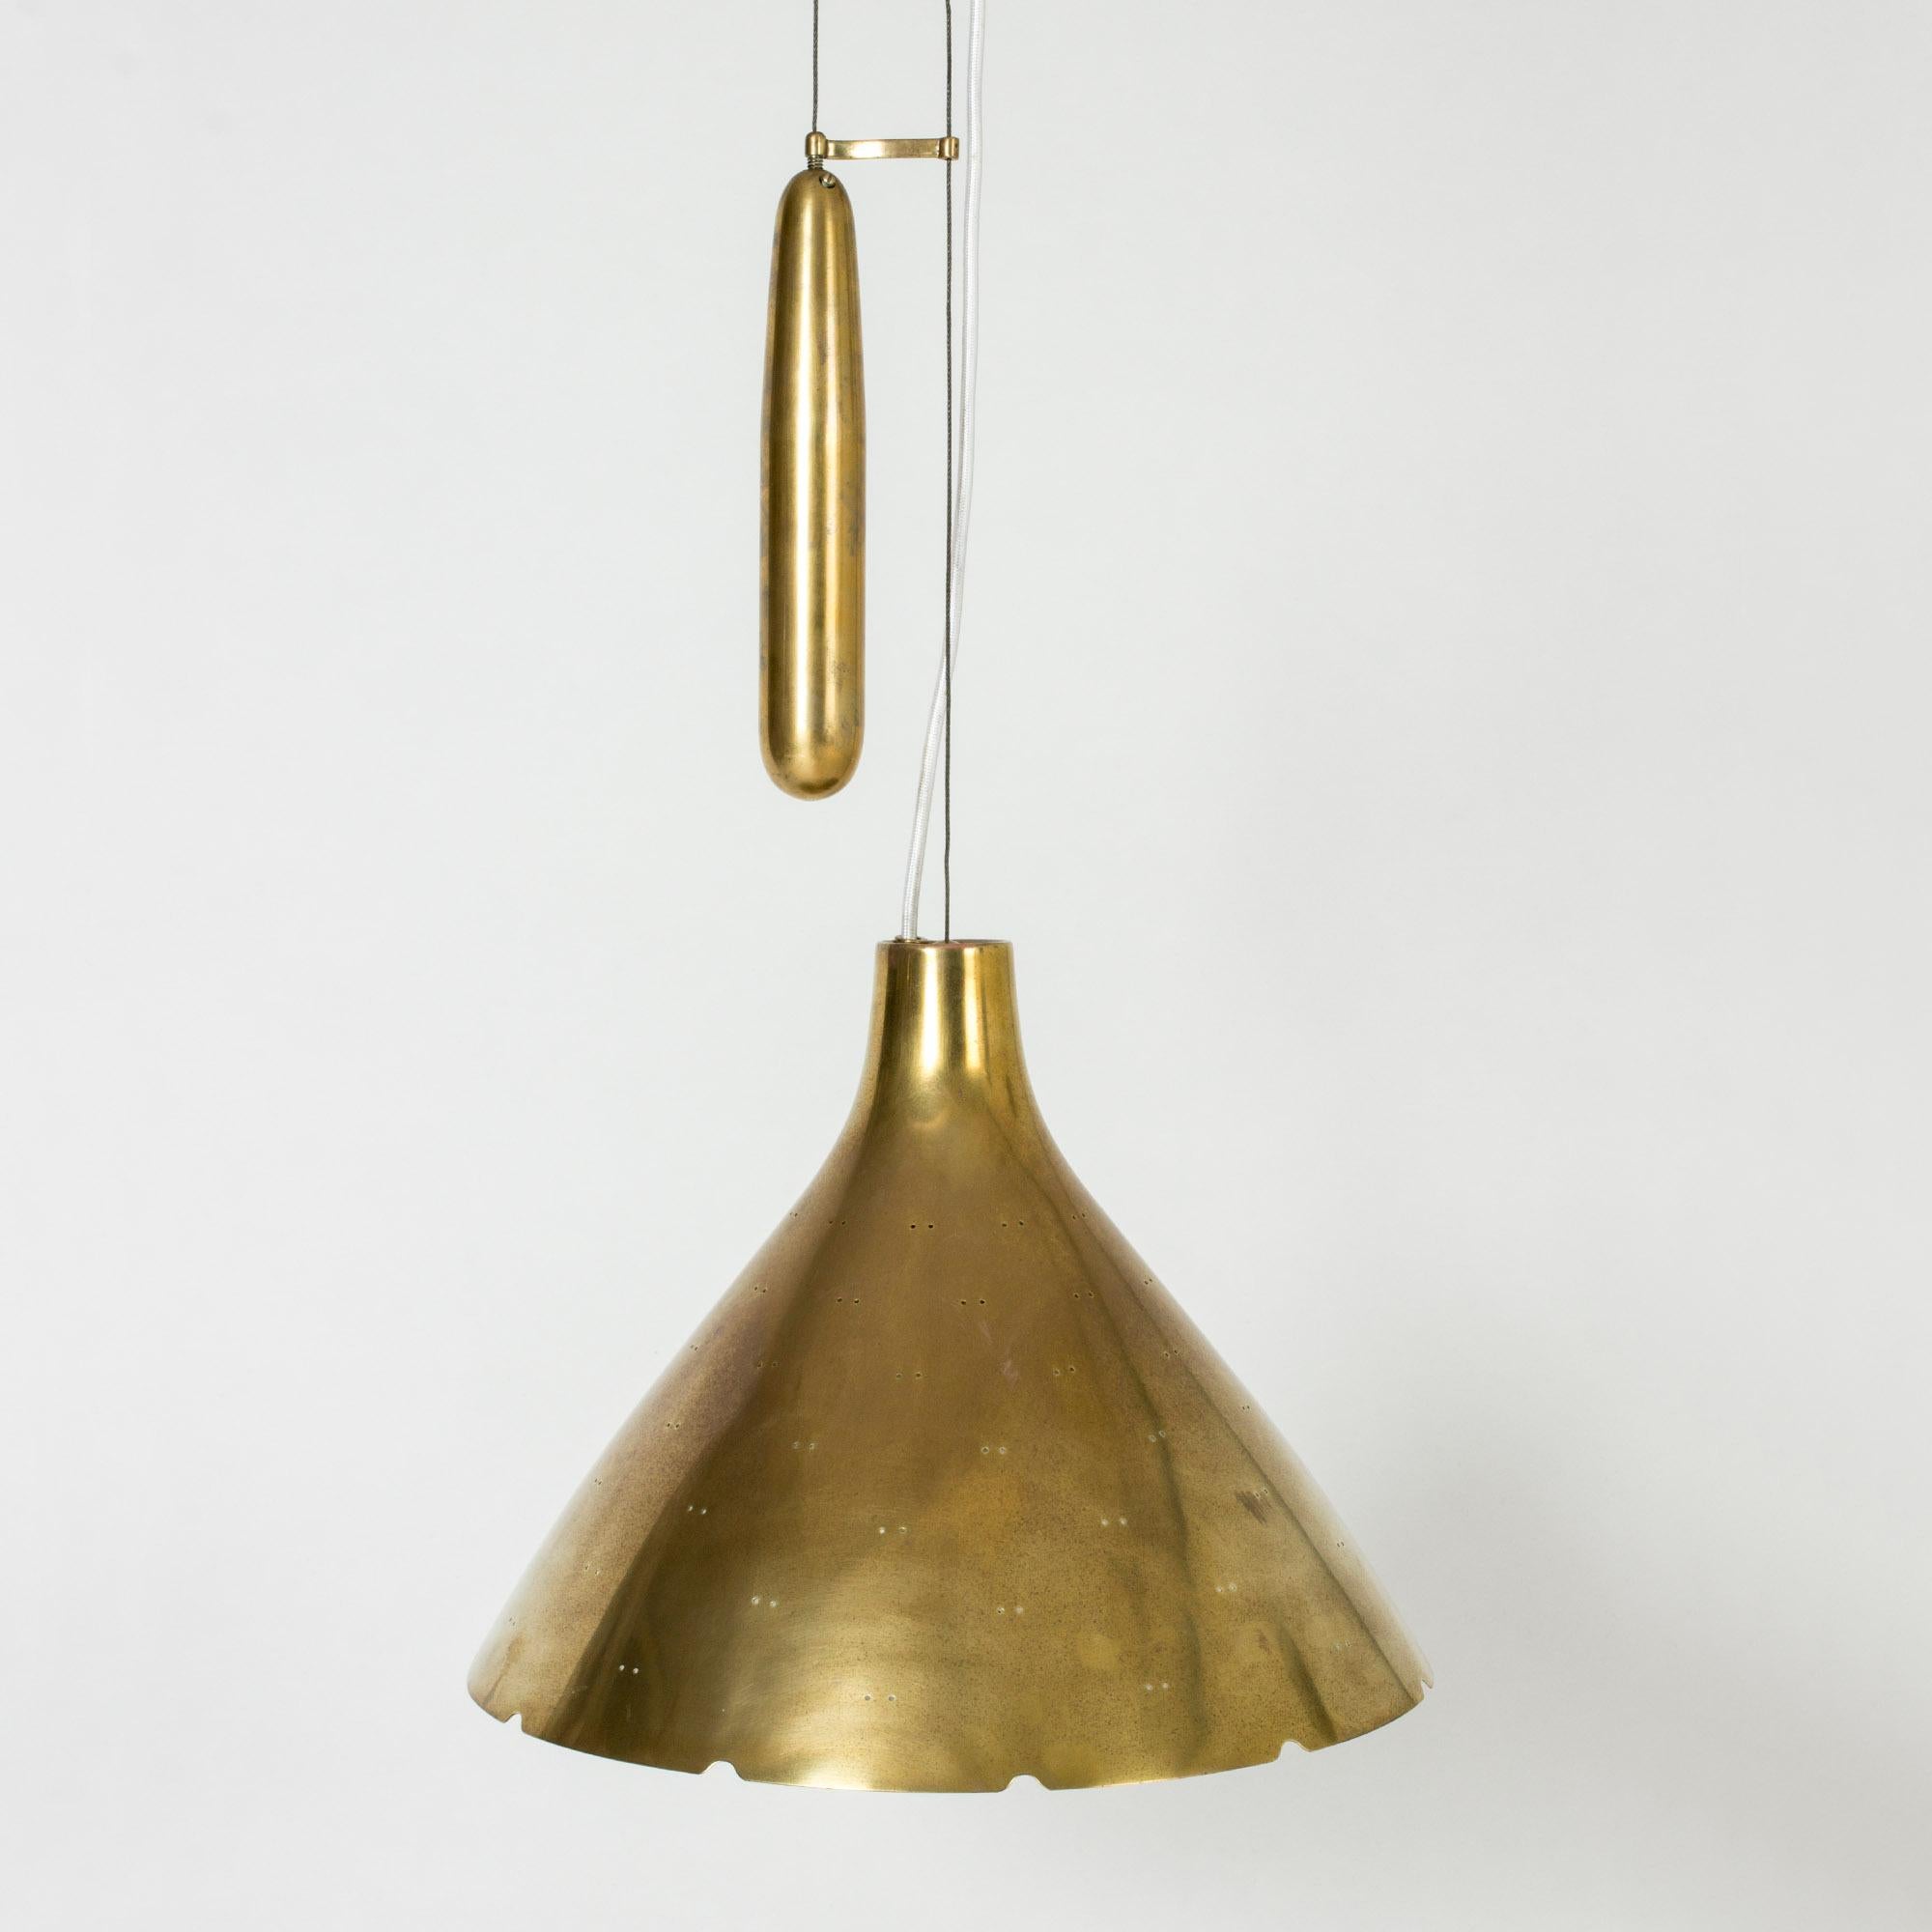 Scandinavian Modern Midcentury Brass Pendant Lamp by Paavo Tynell for Taito Oy, Finland, 1950s For Sale